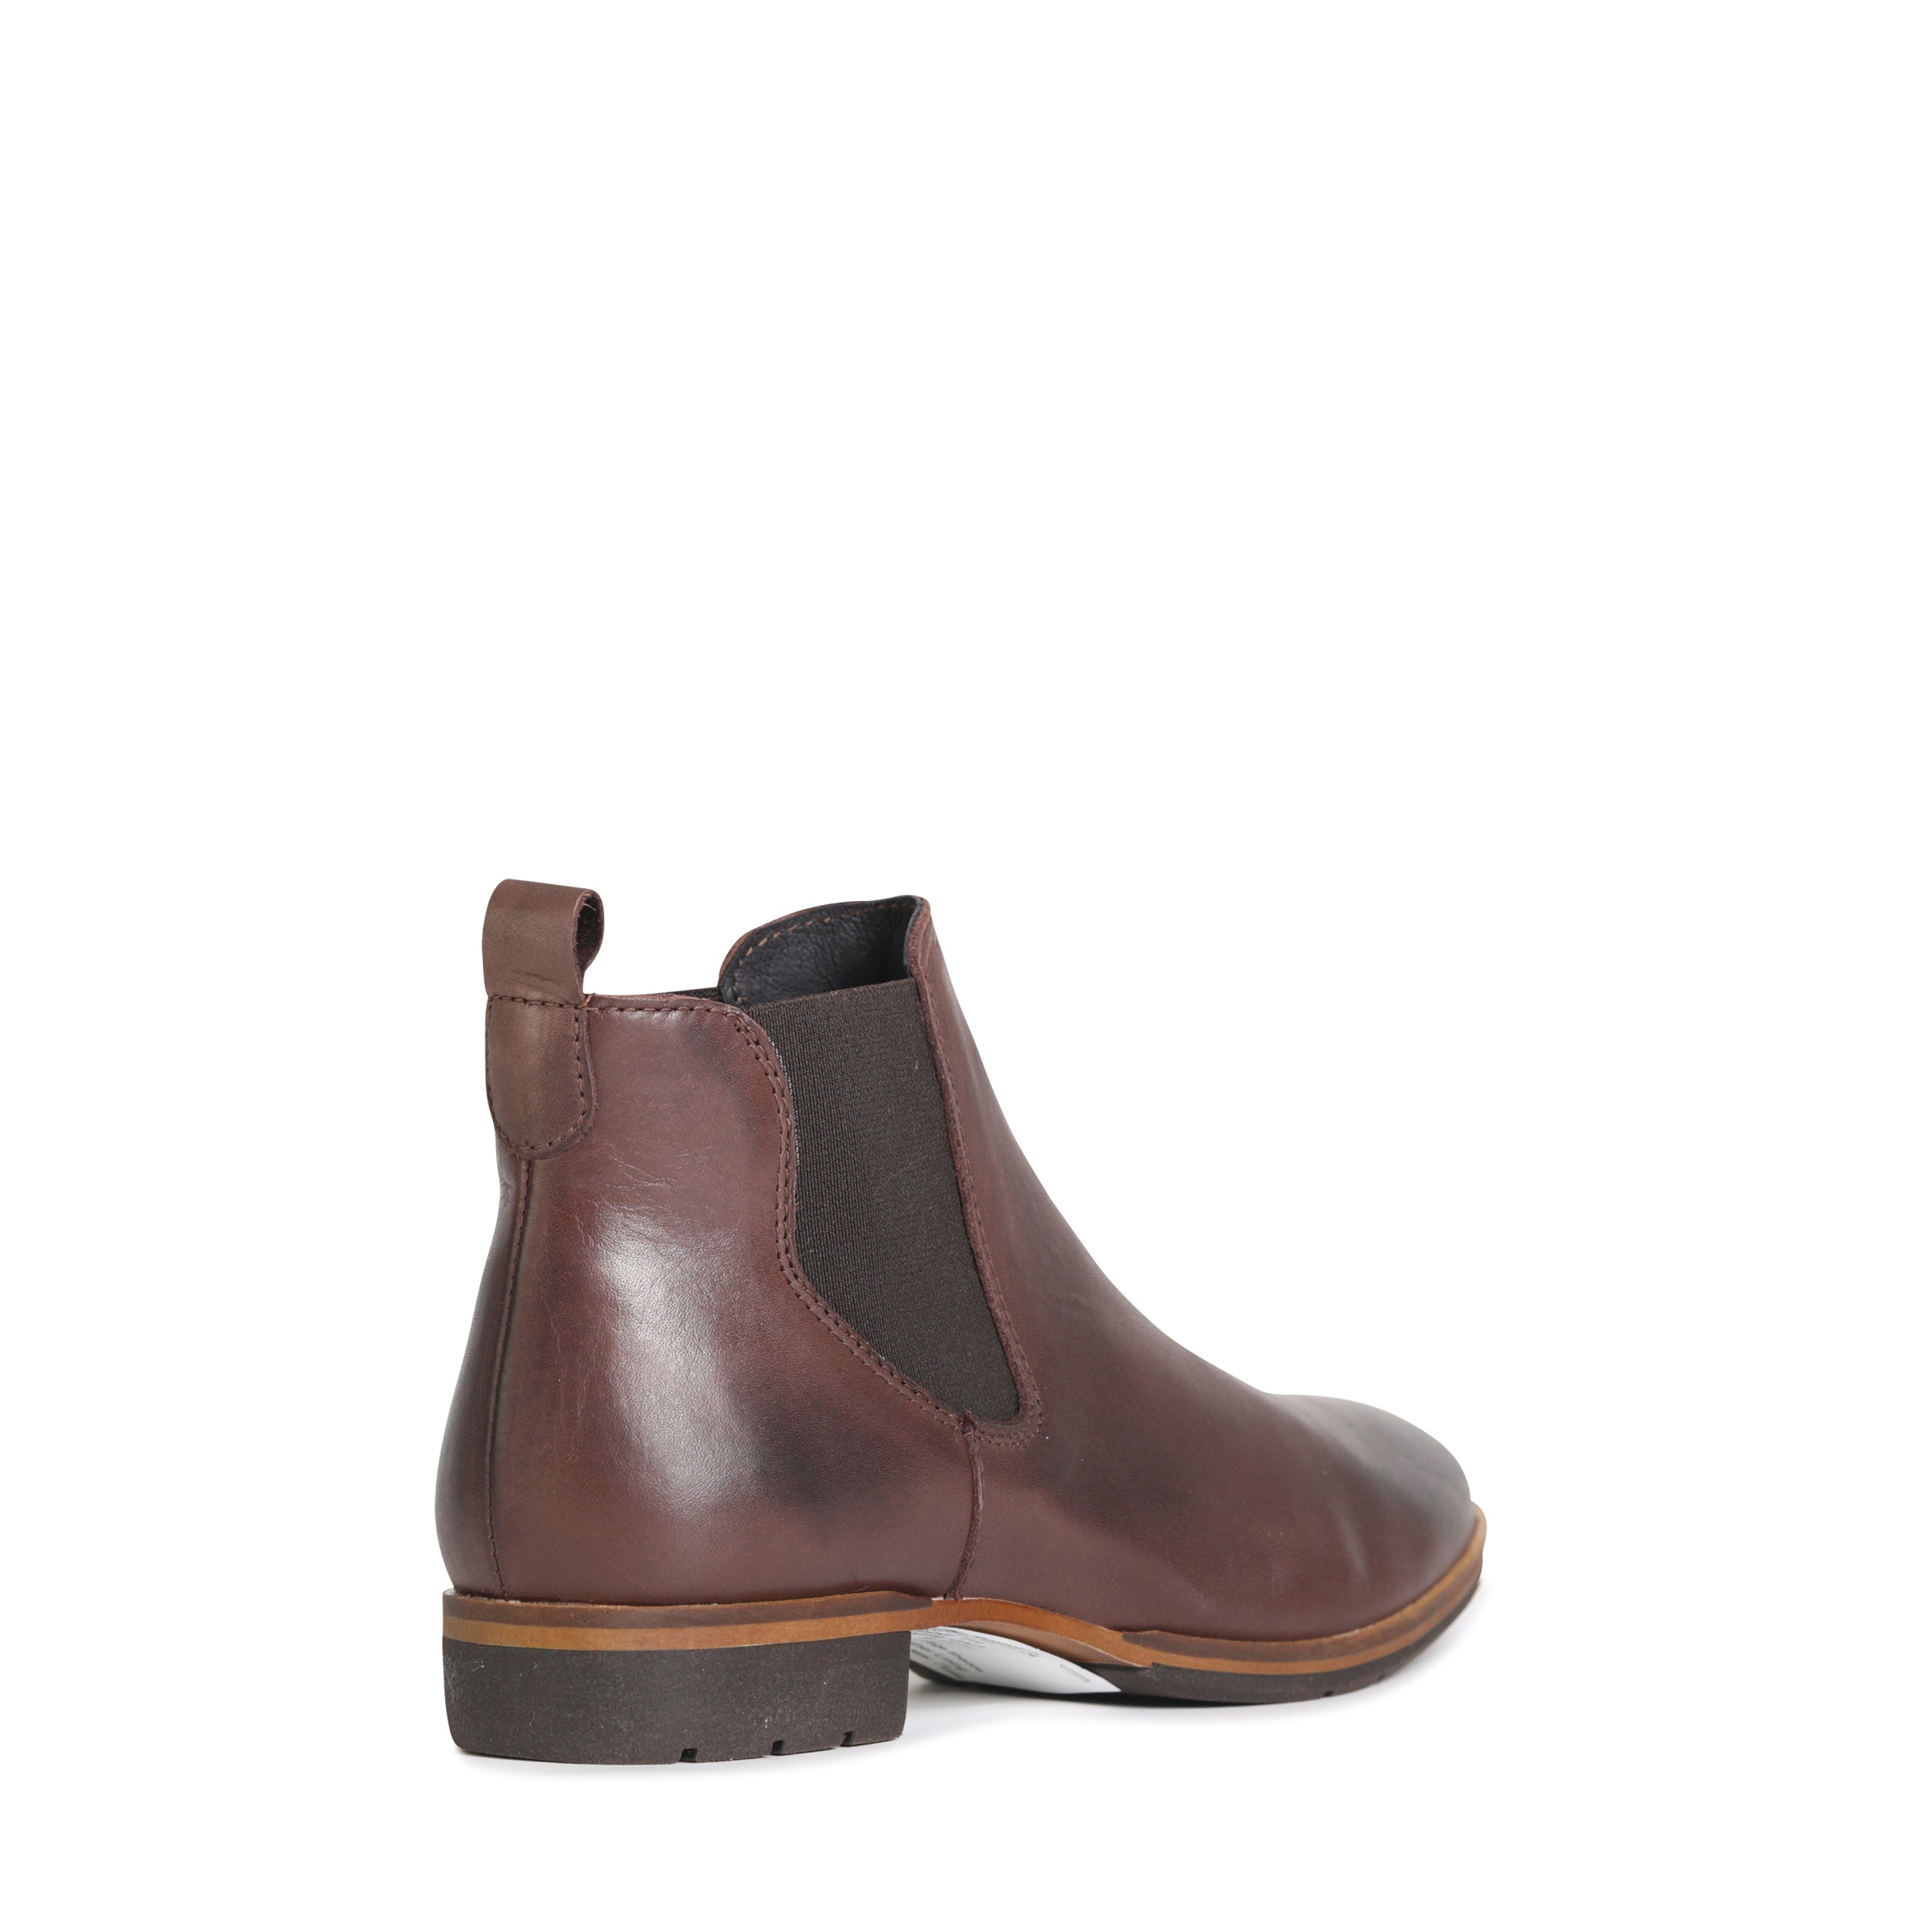 GALA - EOS Footwear - Ankle Boots #color_Chestnut